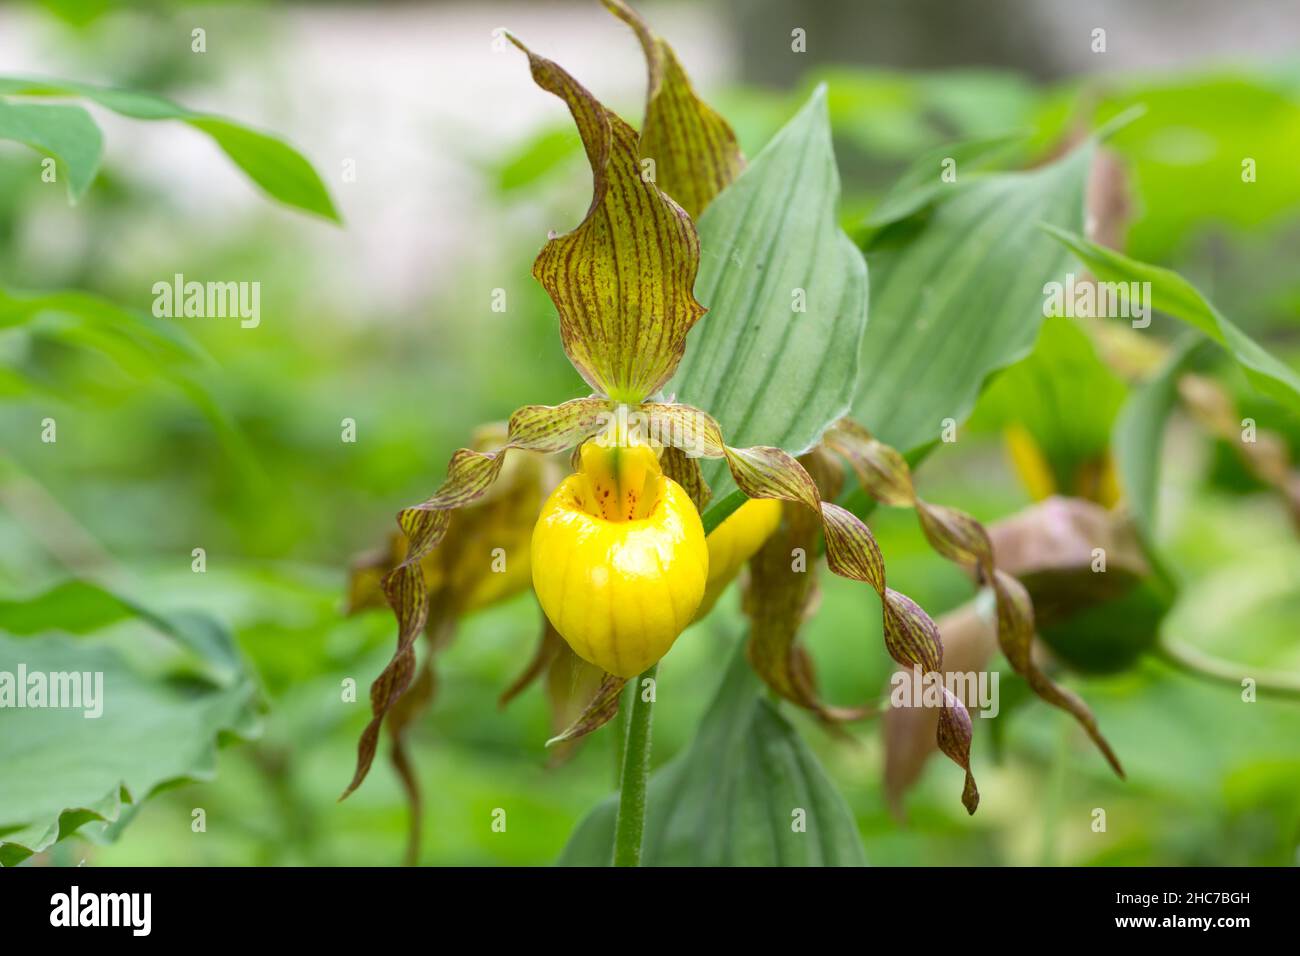 Selective shot of a yellow lady's slipper (Cypripedium parviflorum) in the garden Stock Photo